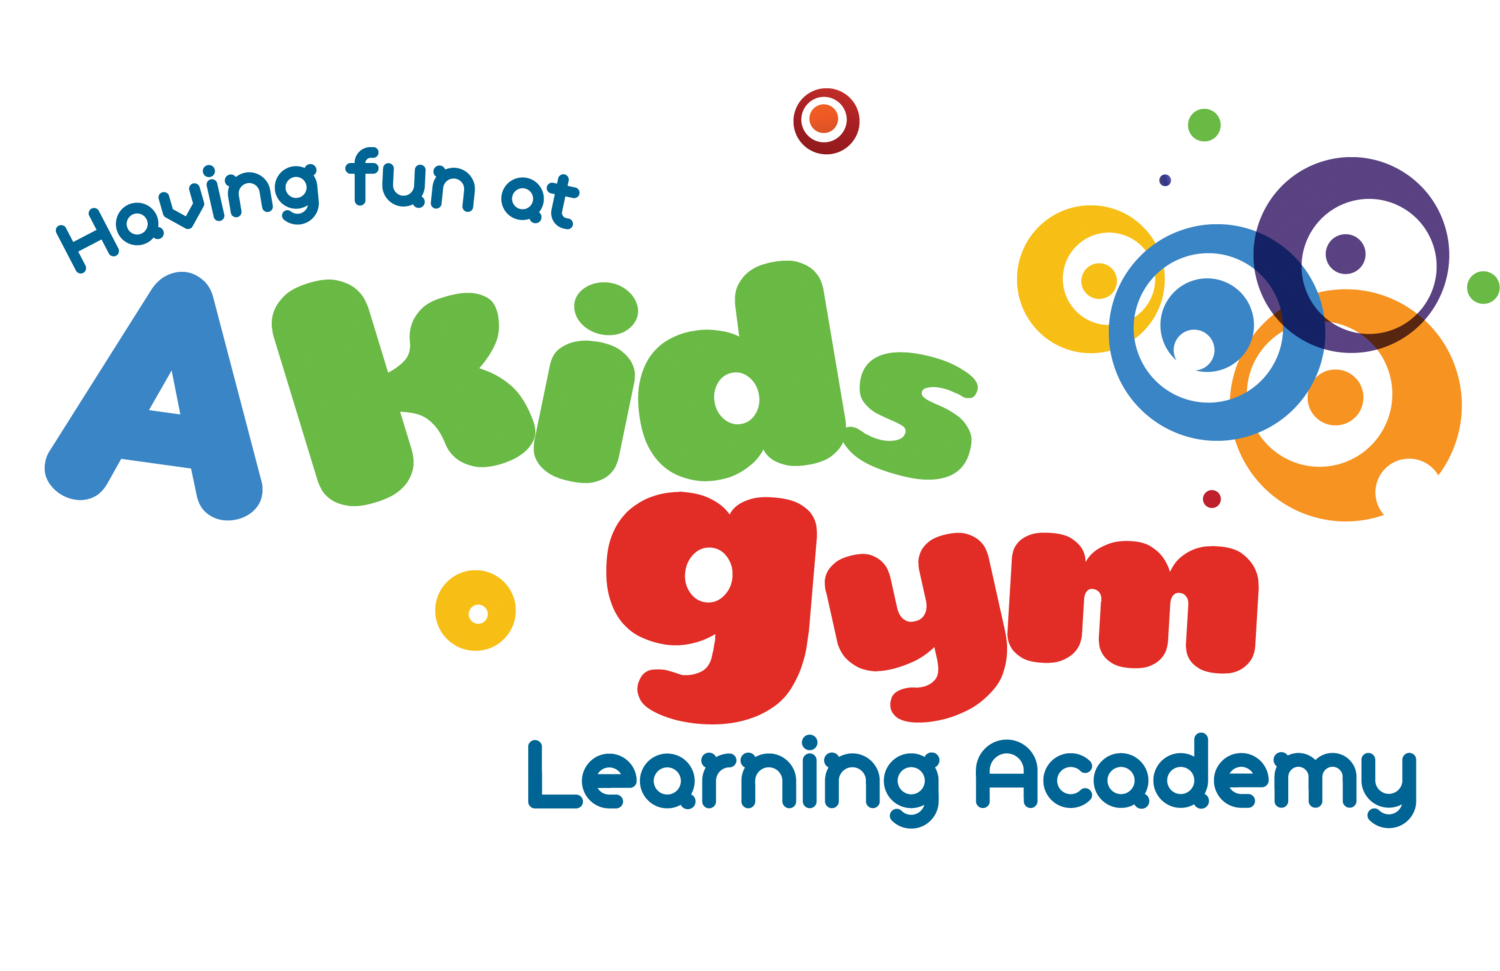 A Kids Gym Learning Academy